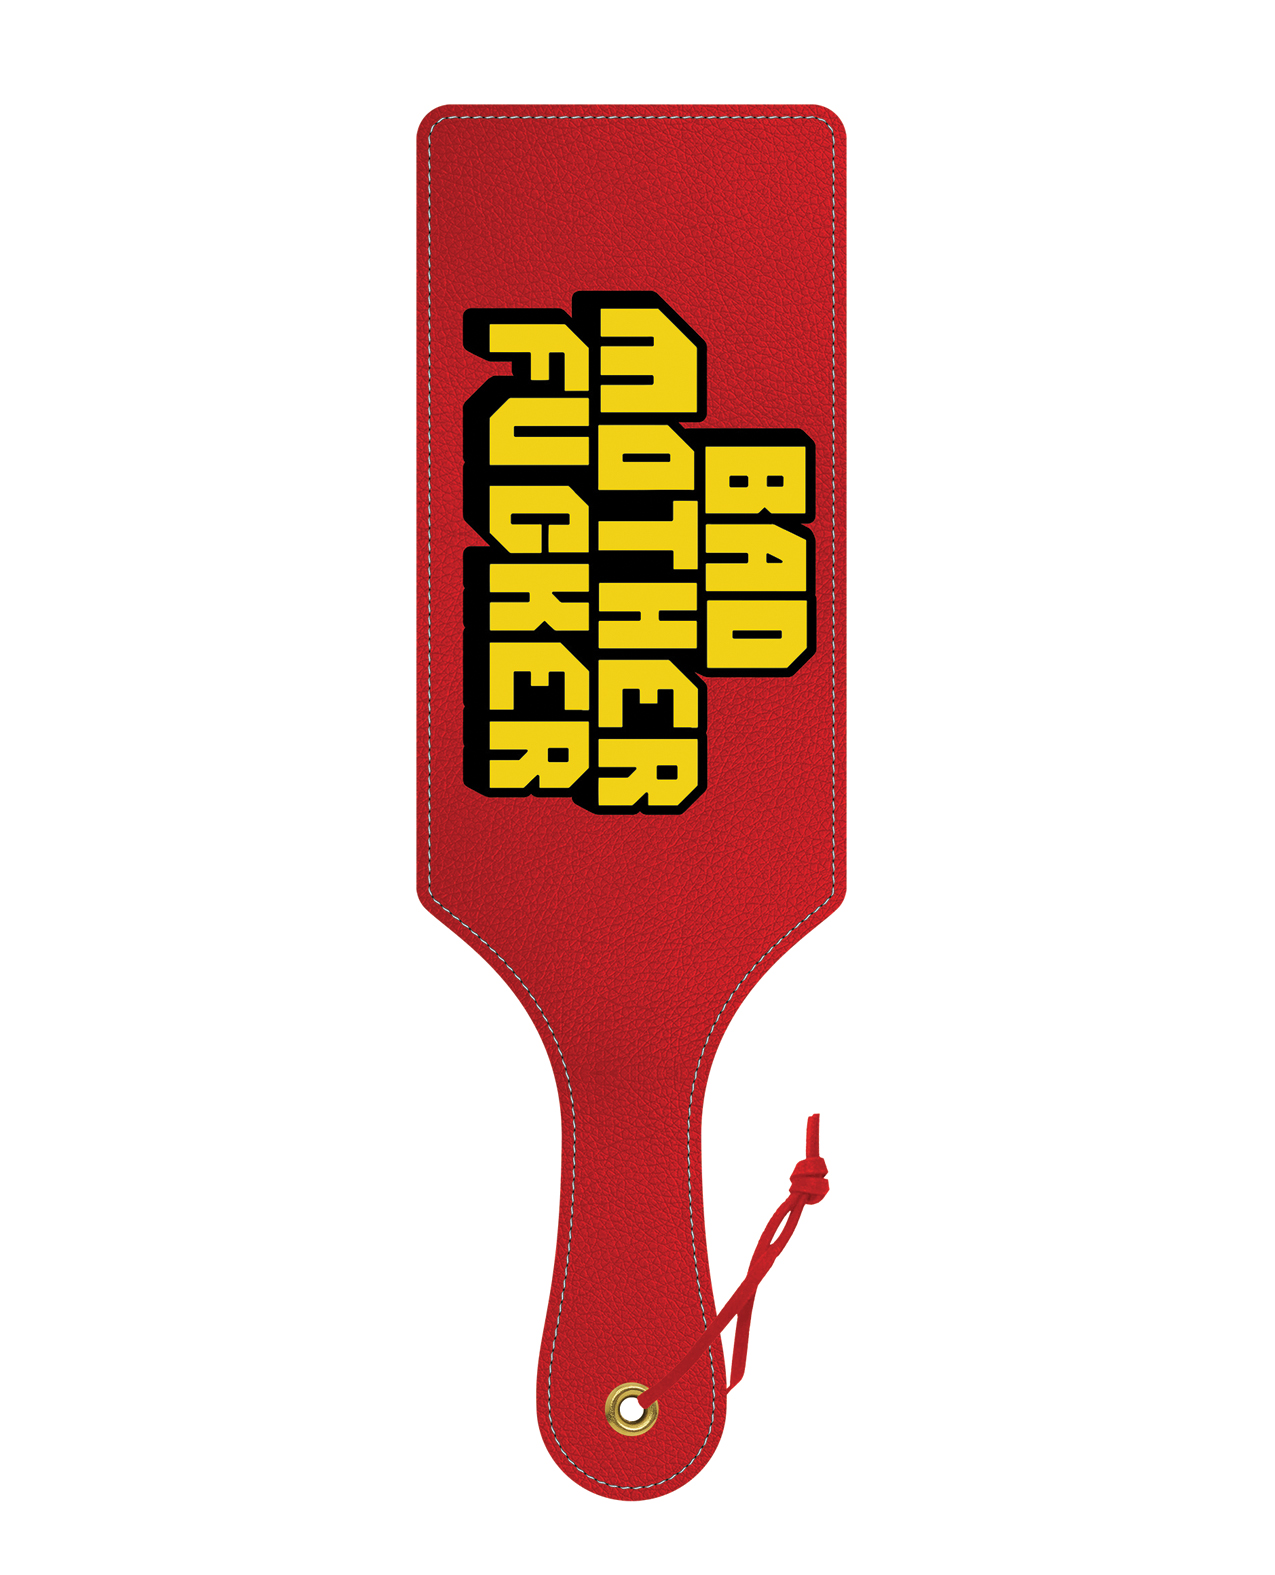 Wood Rocket Bad Mother Fucker Paddle - Red/Yellow